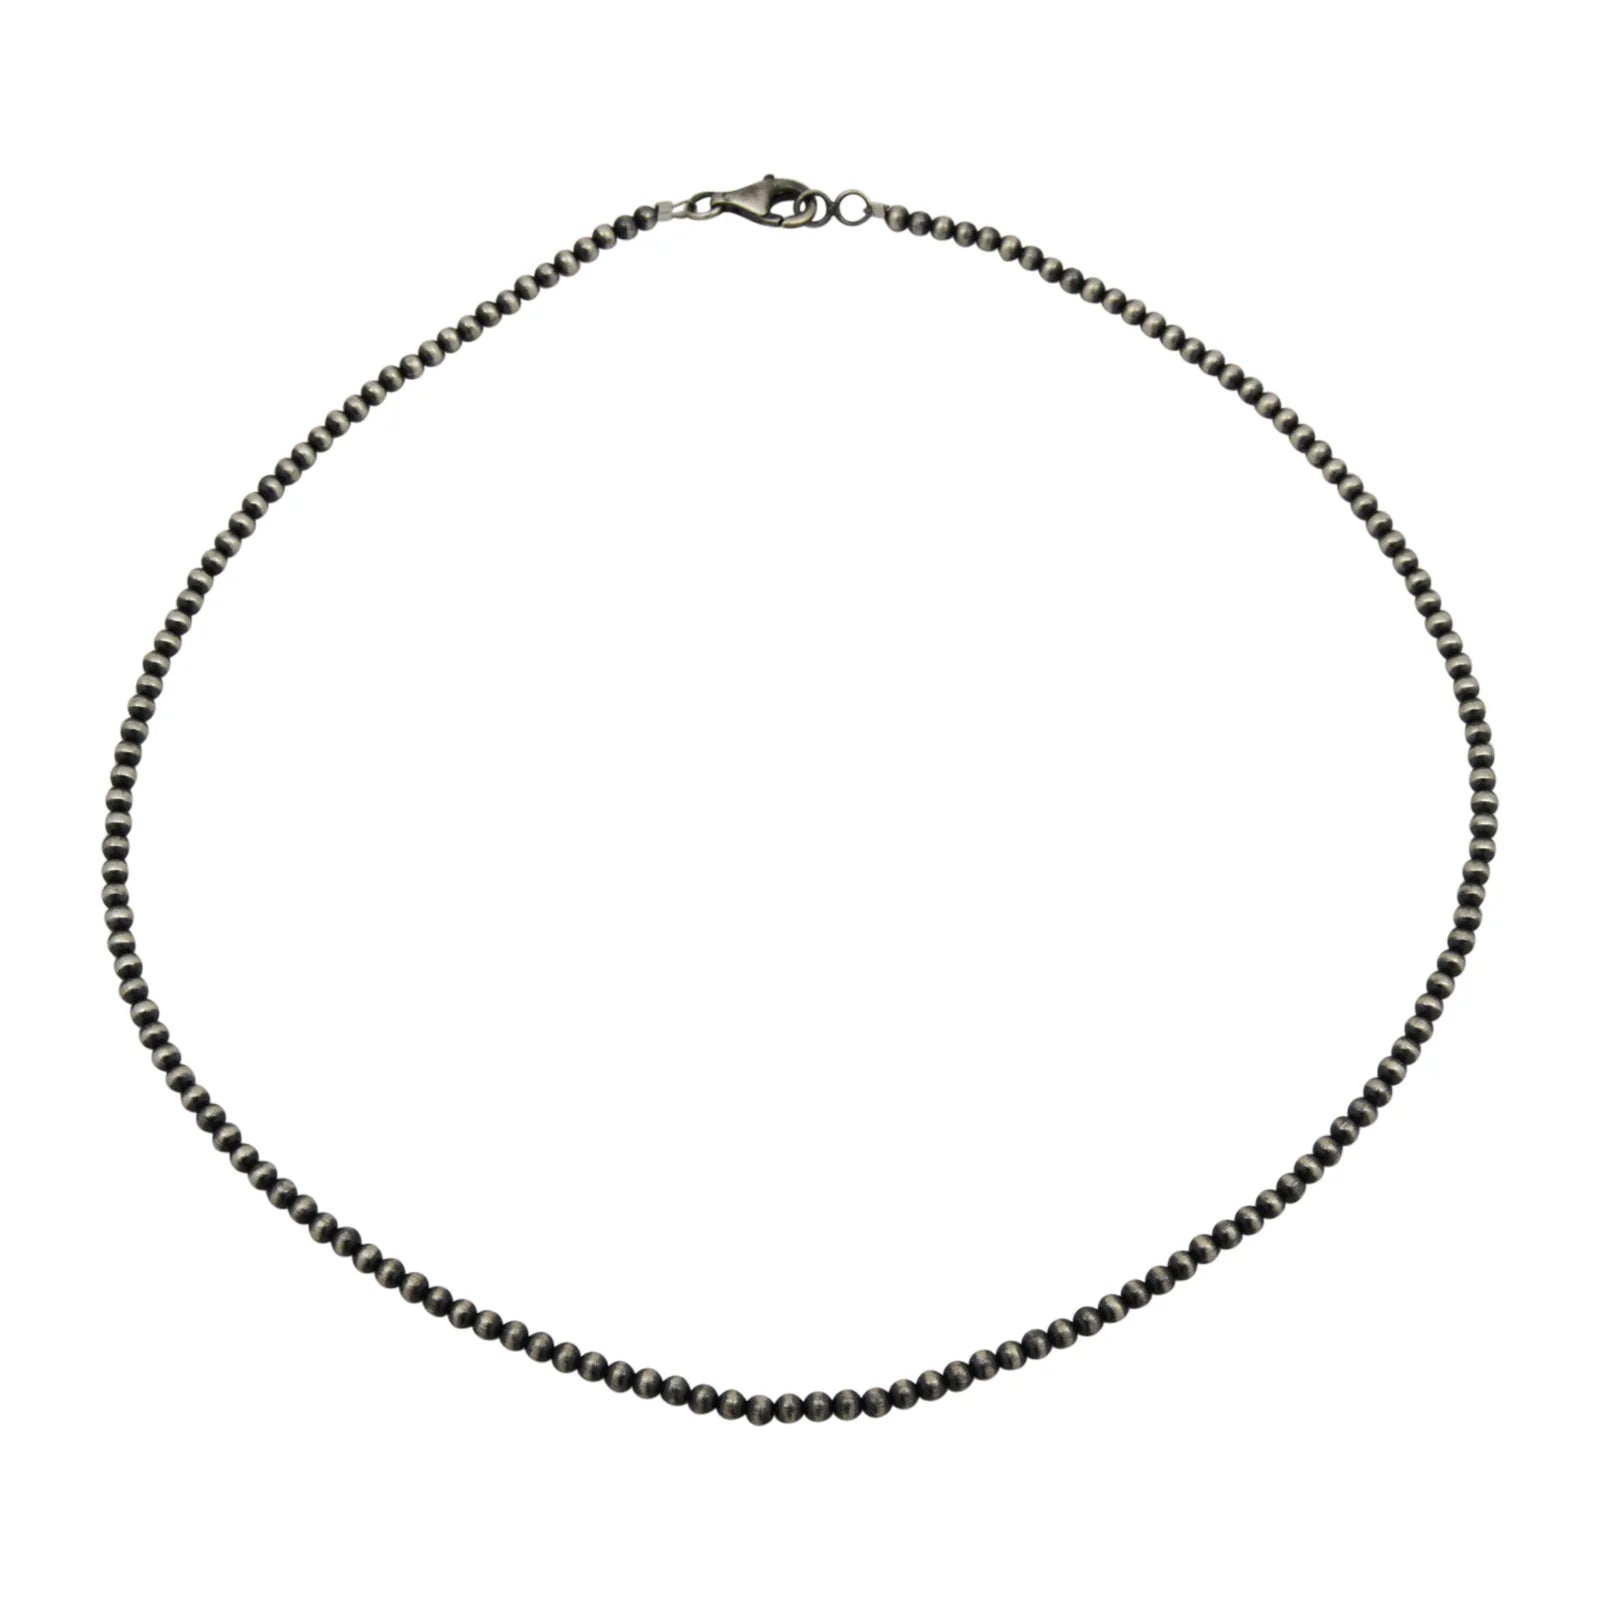 Sterling Silver Navajo Pearl 3mm Oxidize Round Bead Necklace. Available from 14" to 60"